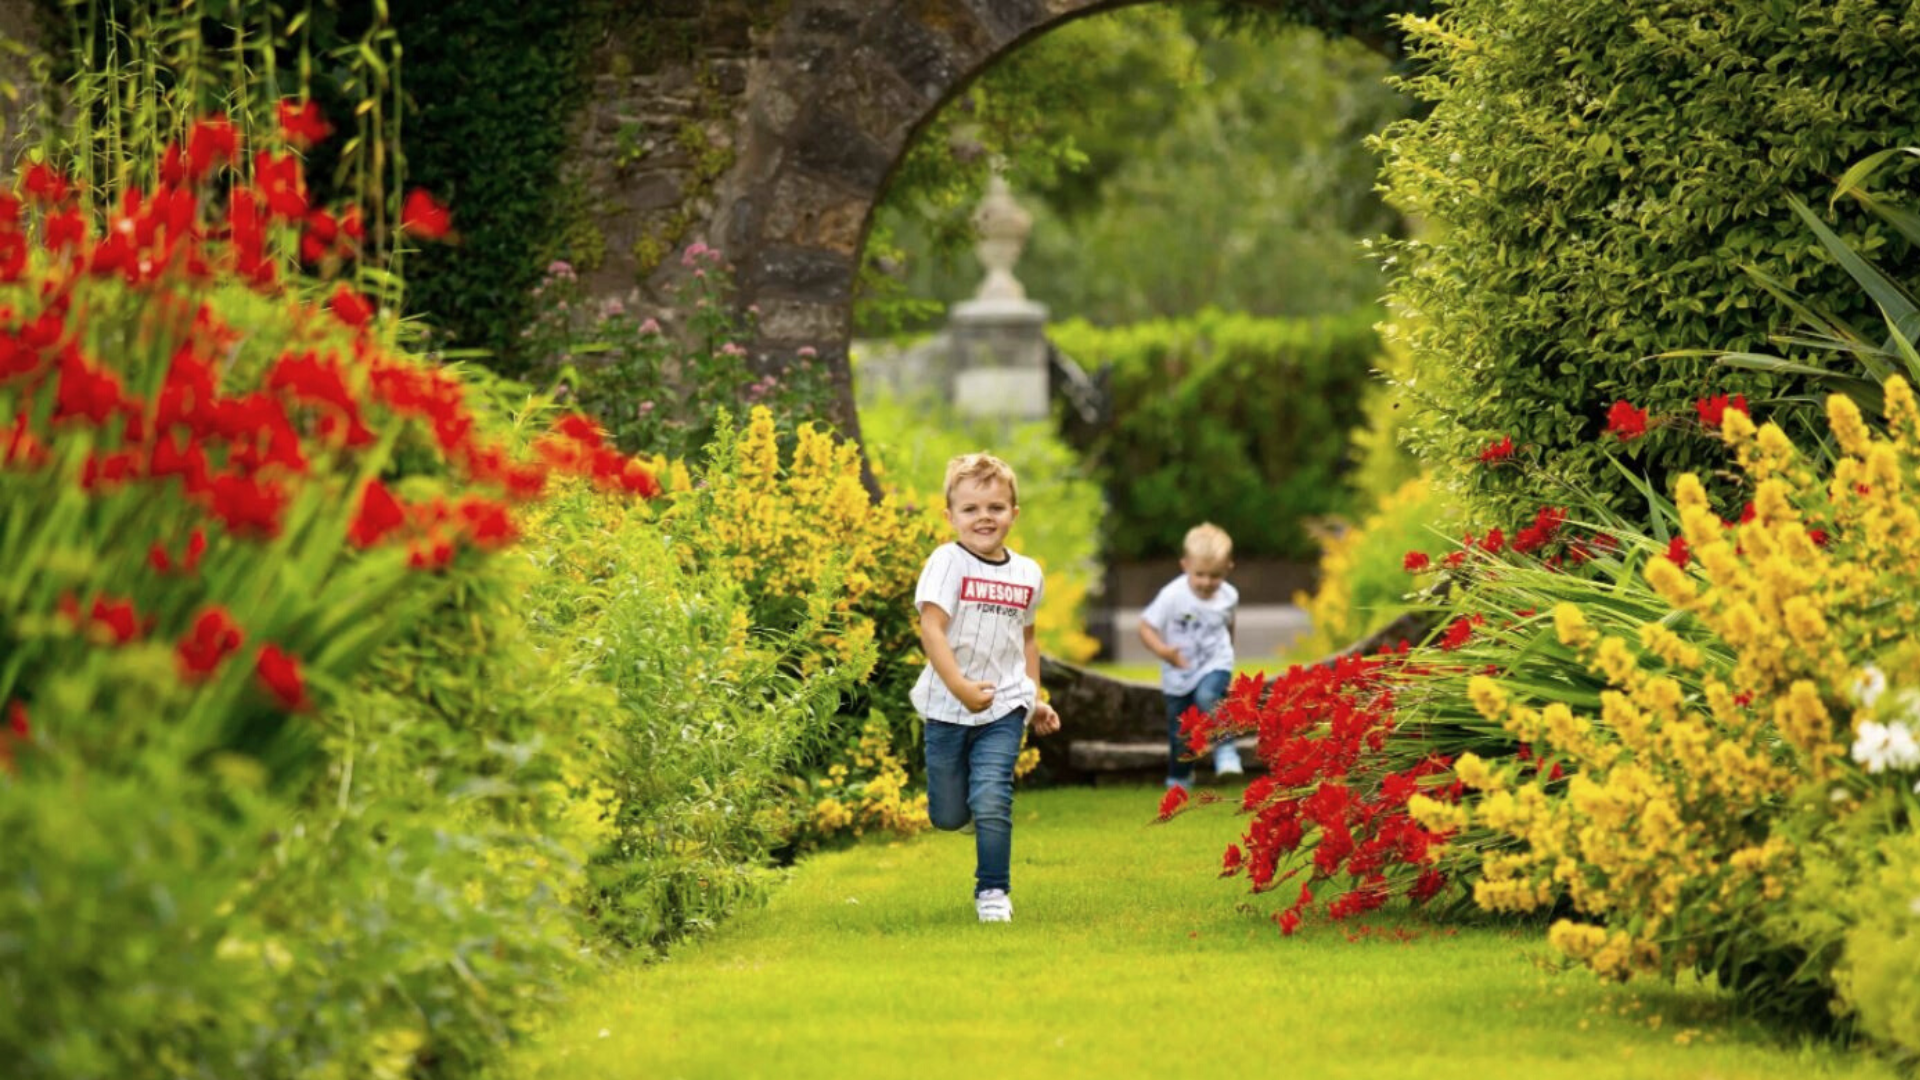 3 Night Easter Family Break – with Dinner on One Night and Access to Junior Club (including kids meals) from €499 per night